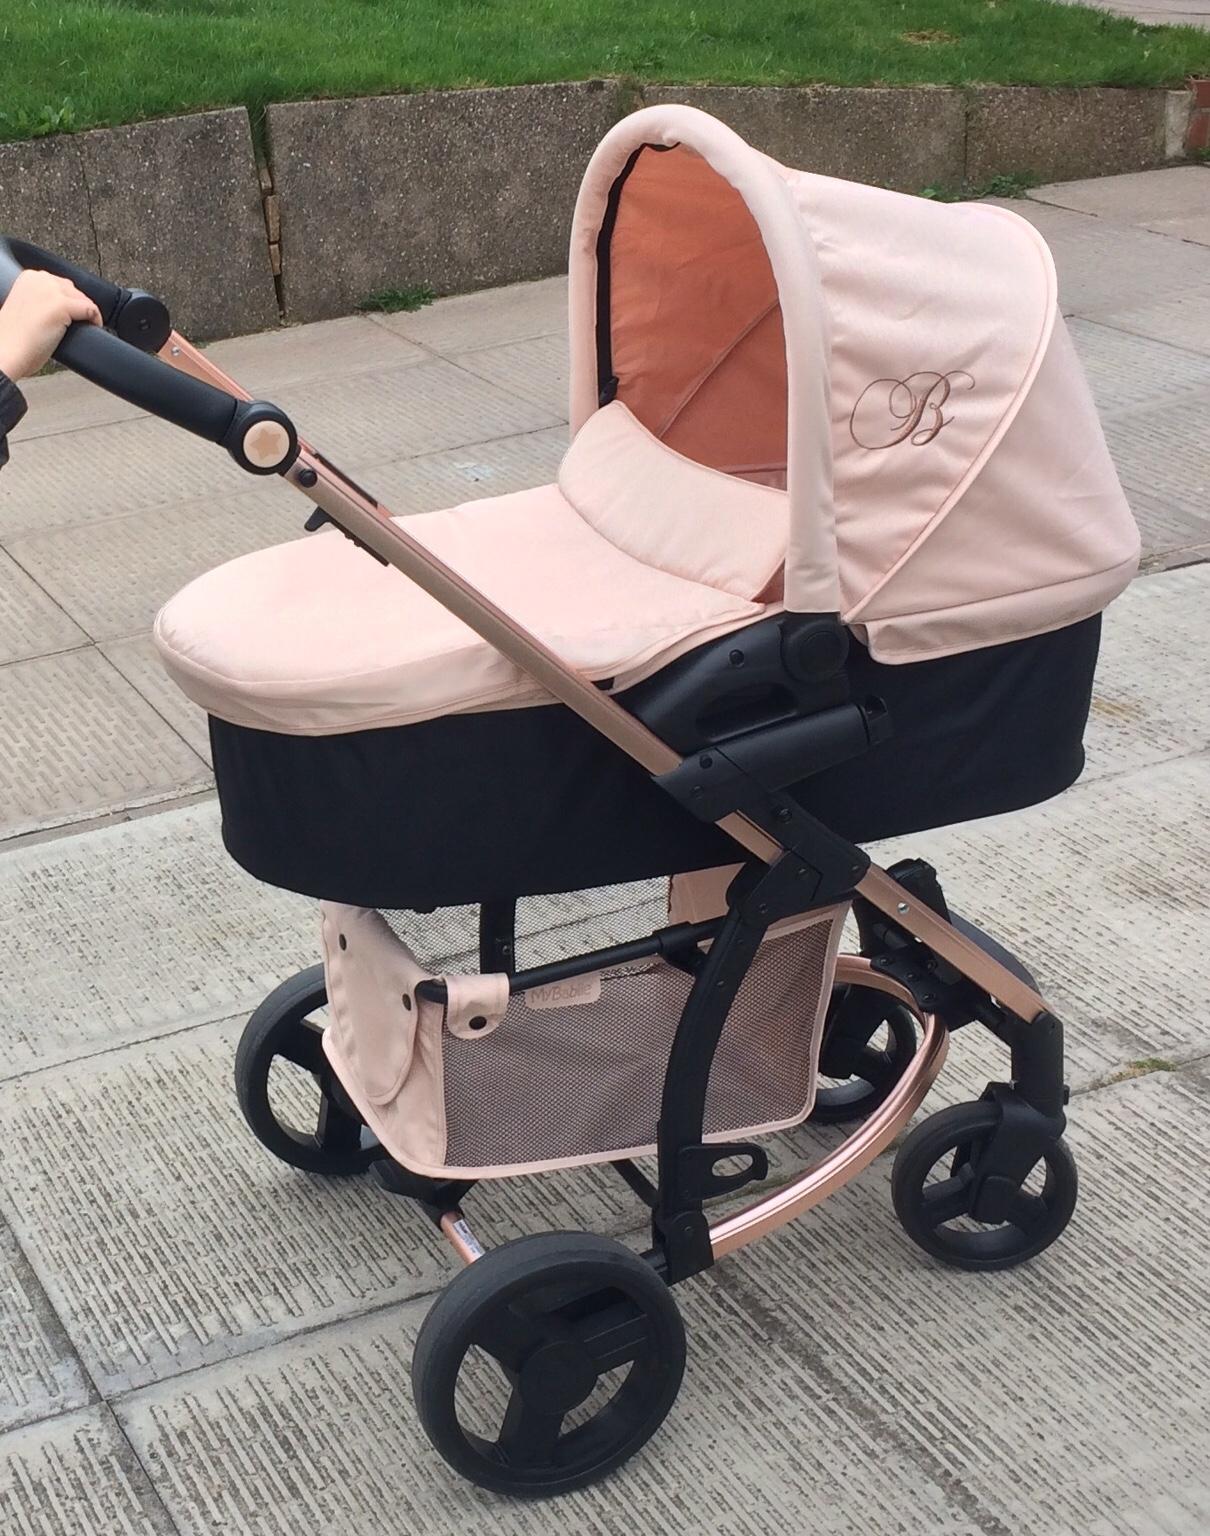 my babiie travel system rose gold